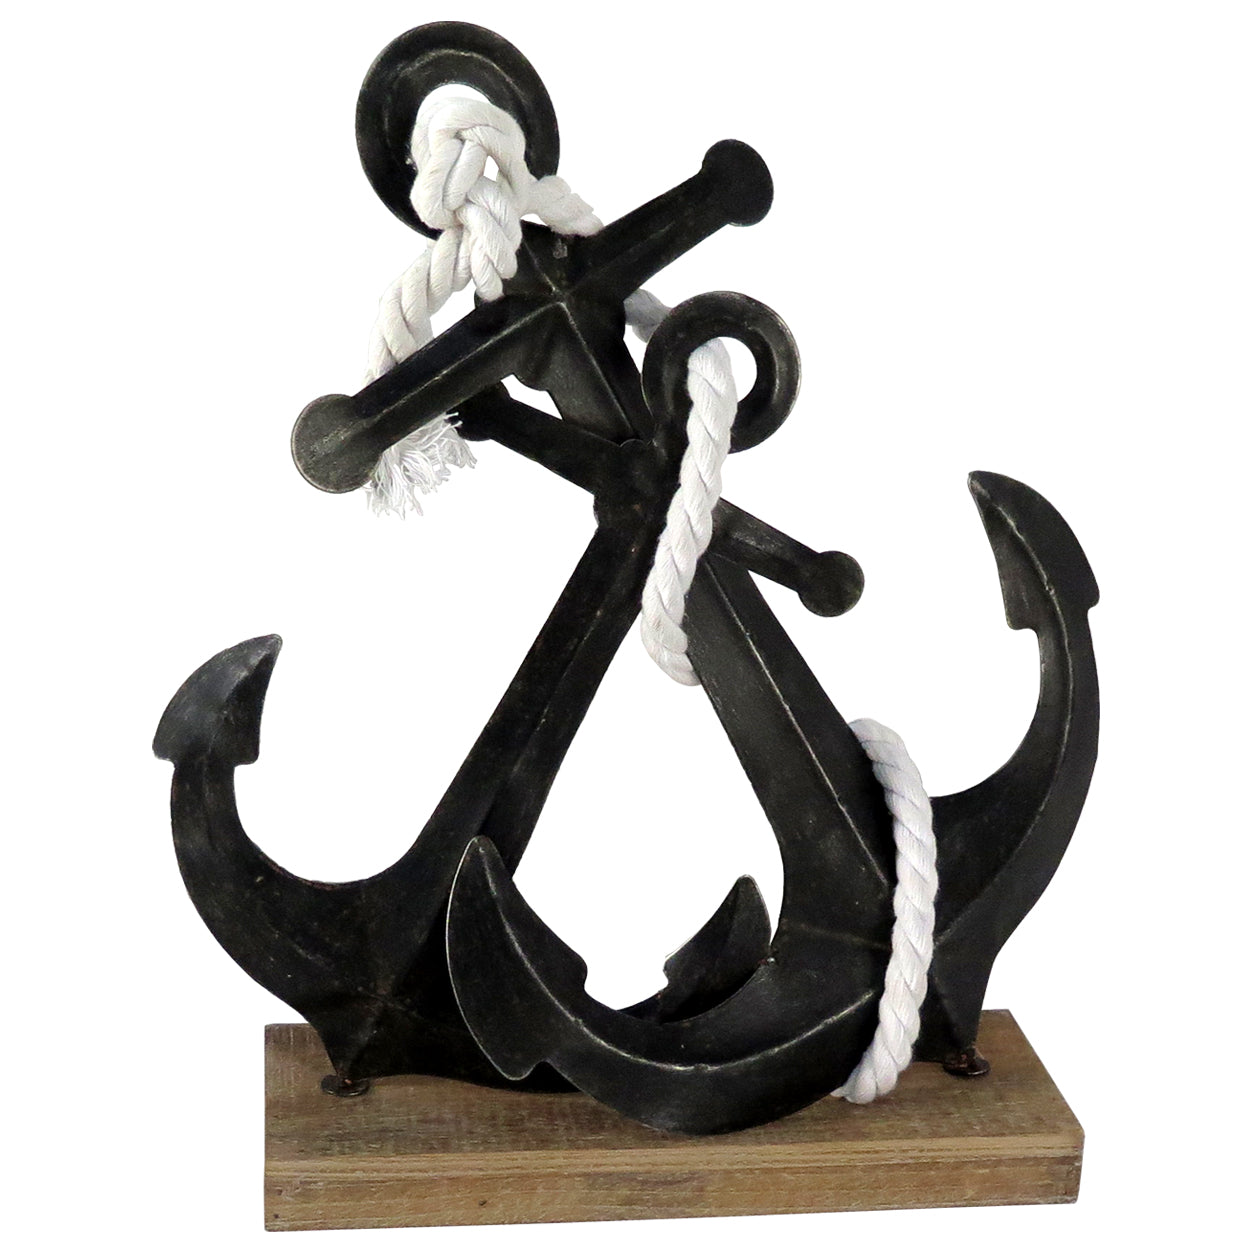 5810090: Metal Anchor Sculpture on Wood Base